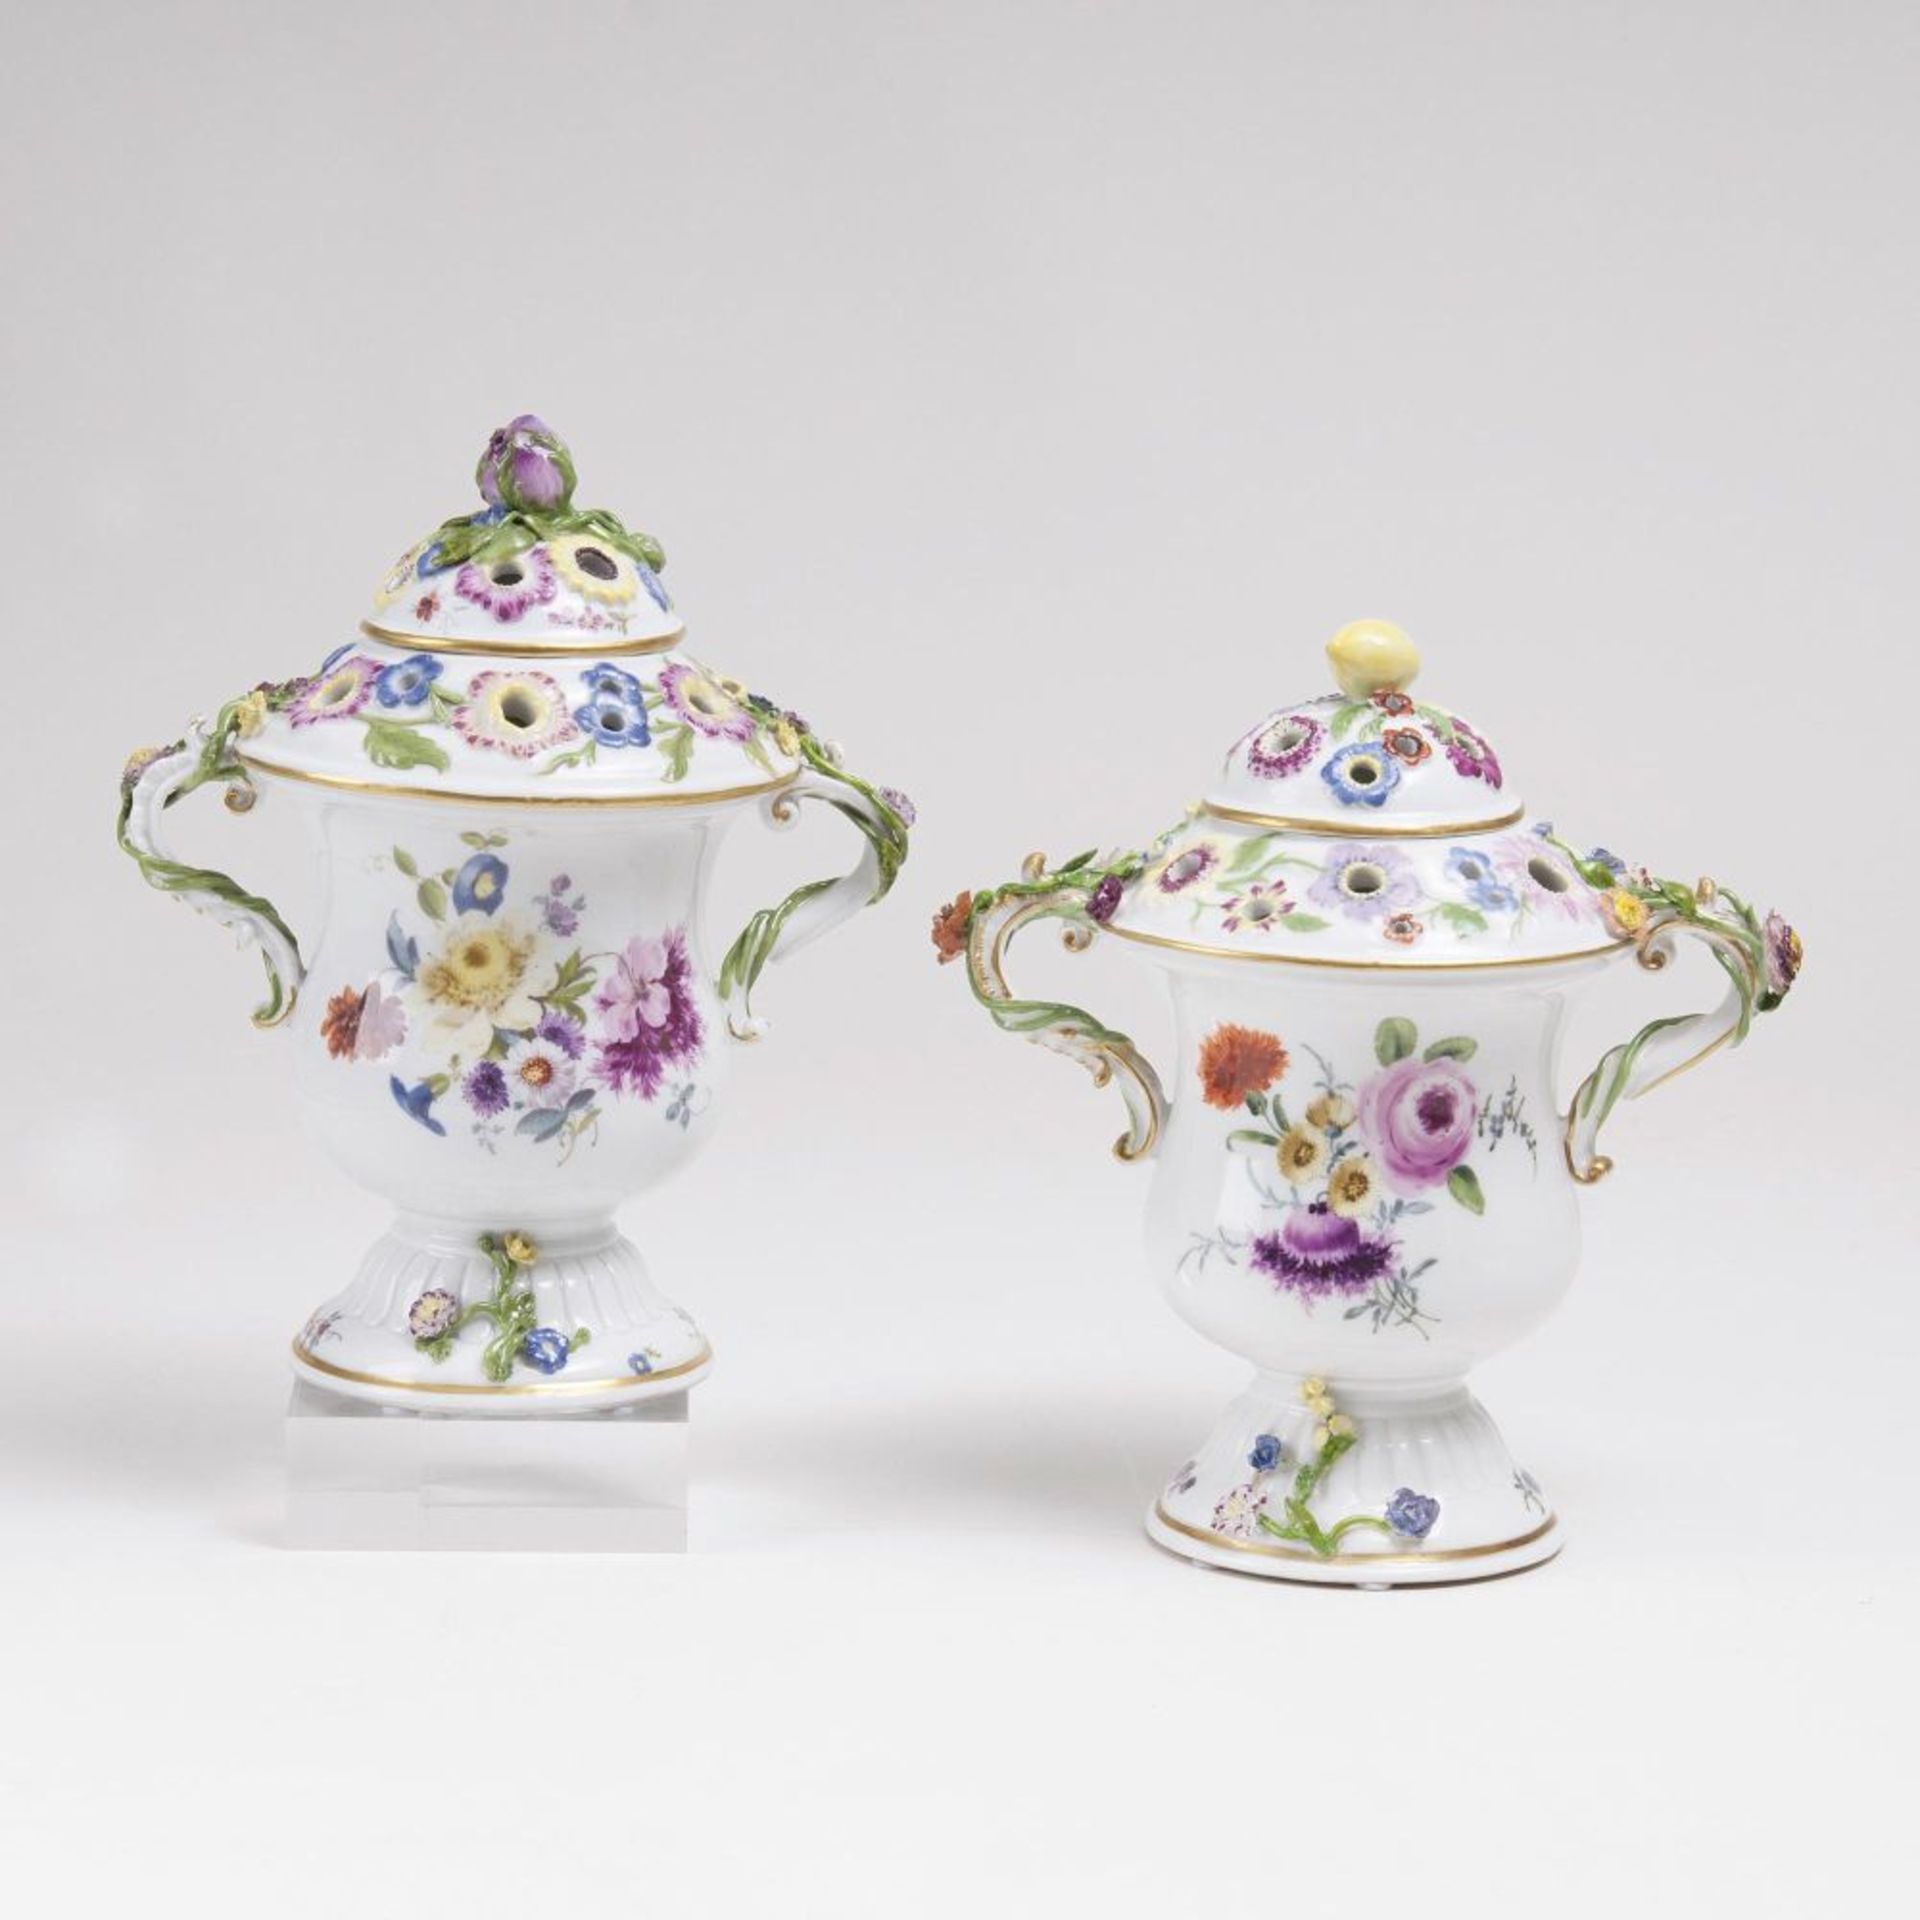 A Pair of Potpourri Vases with Flowers